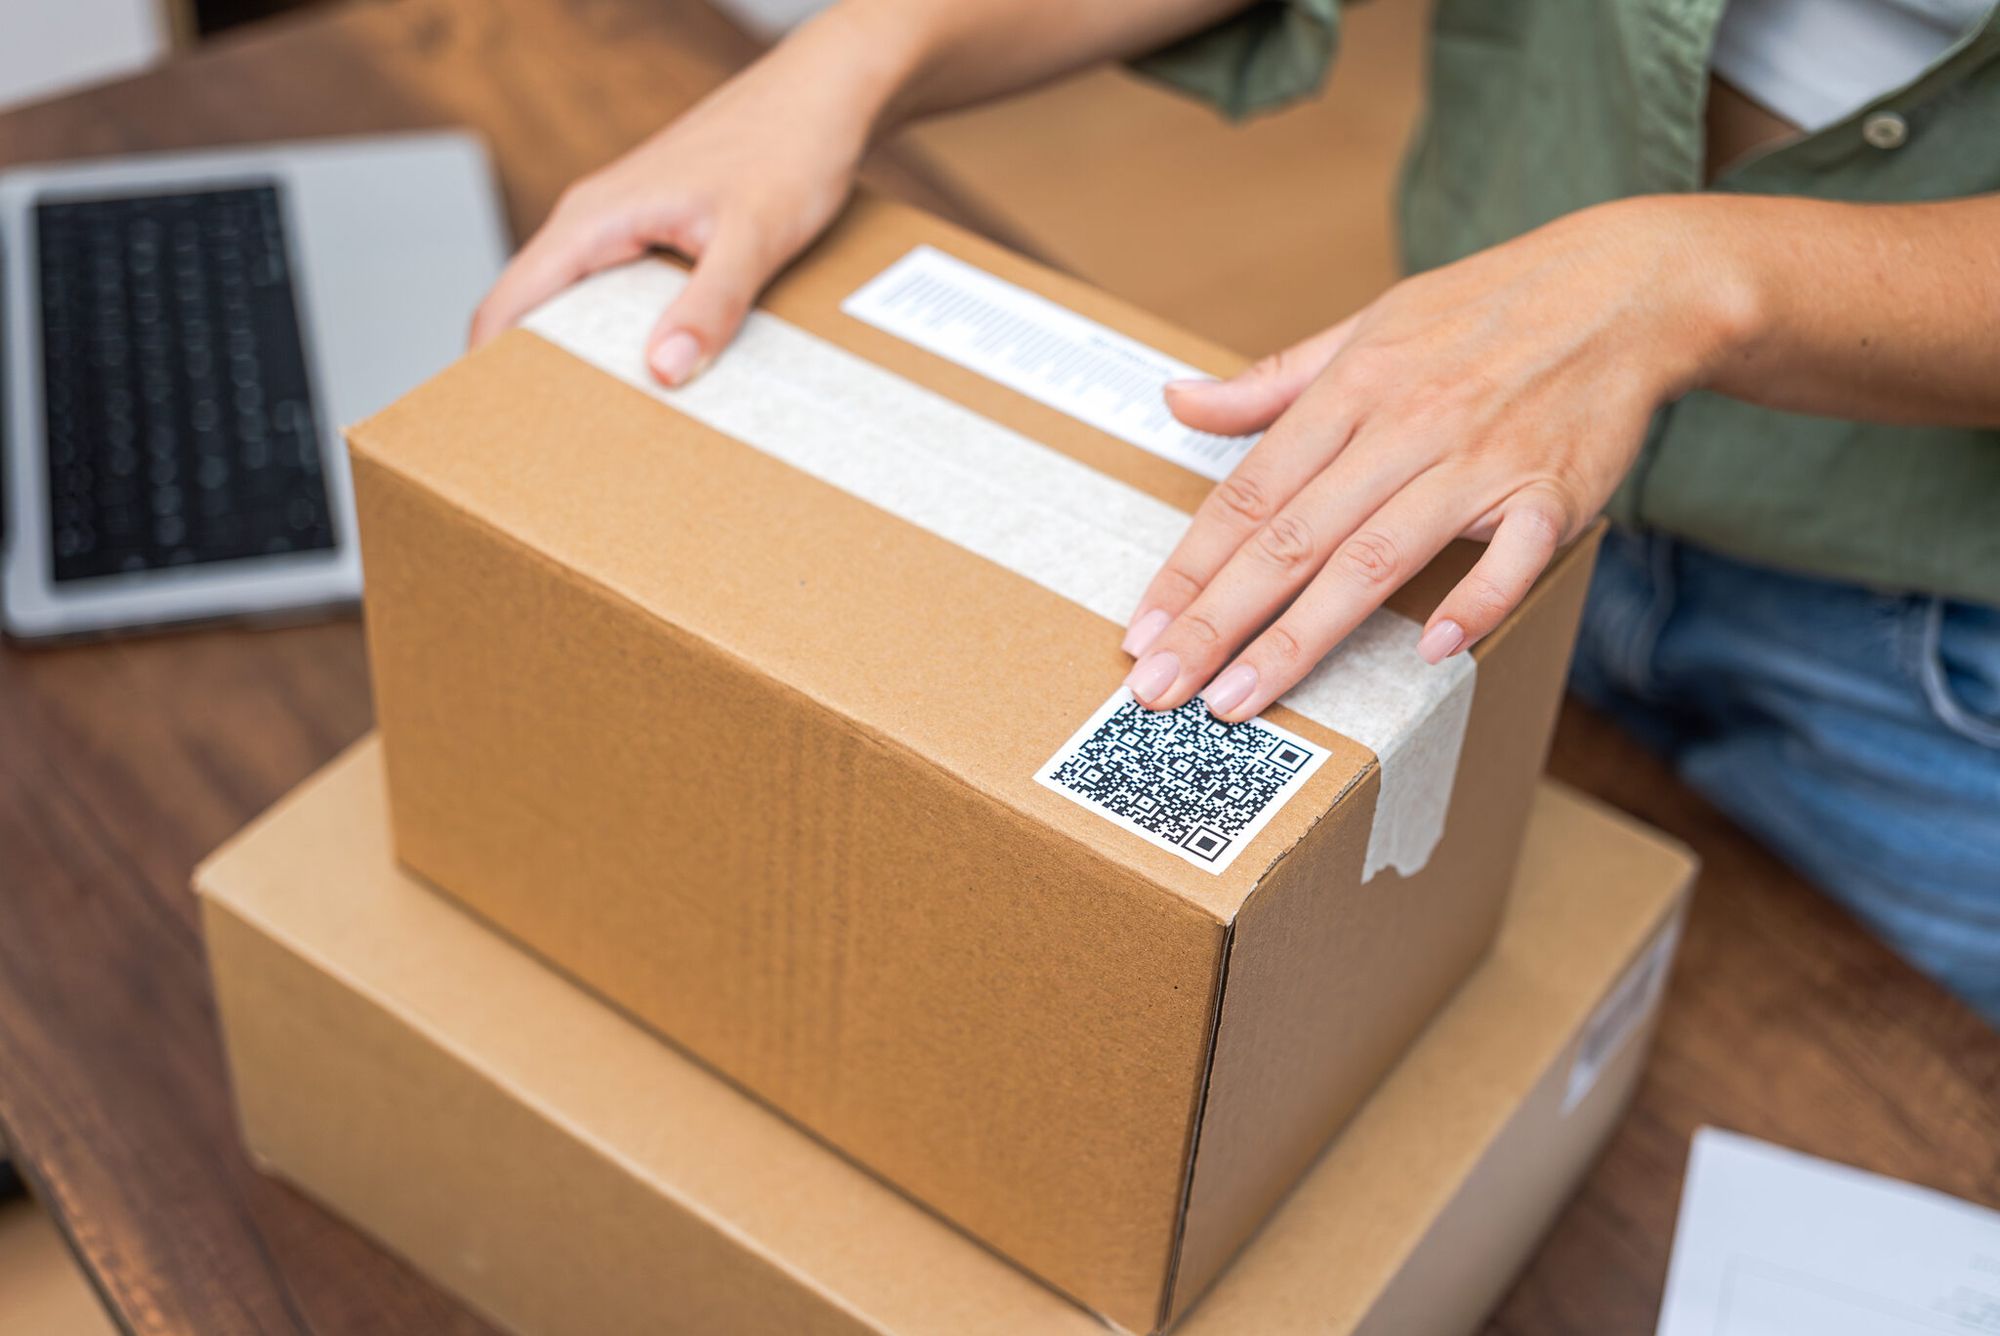 Close-up of woman's hands adding a QR code sticker to a package